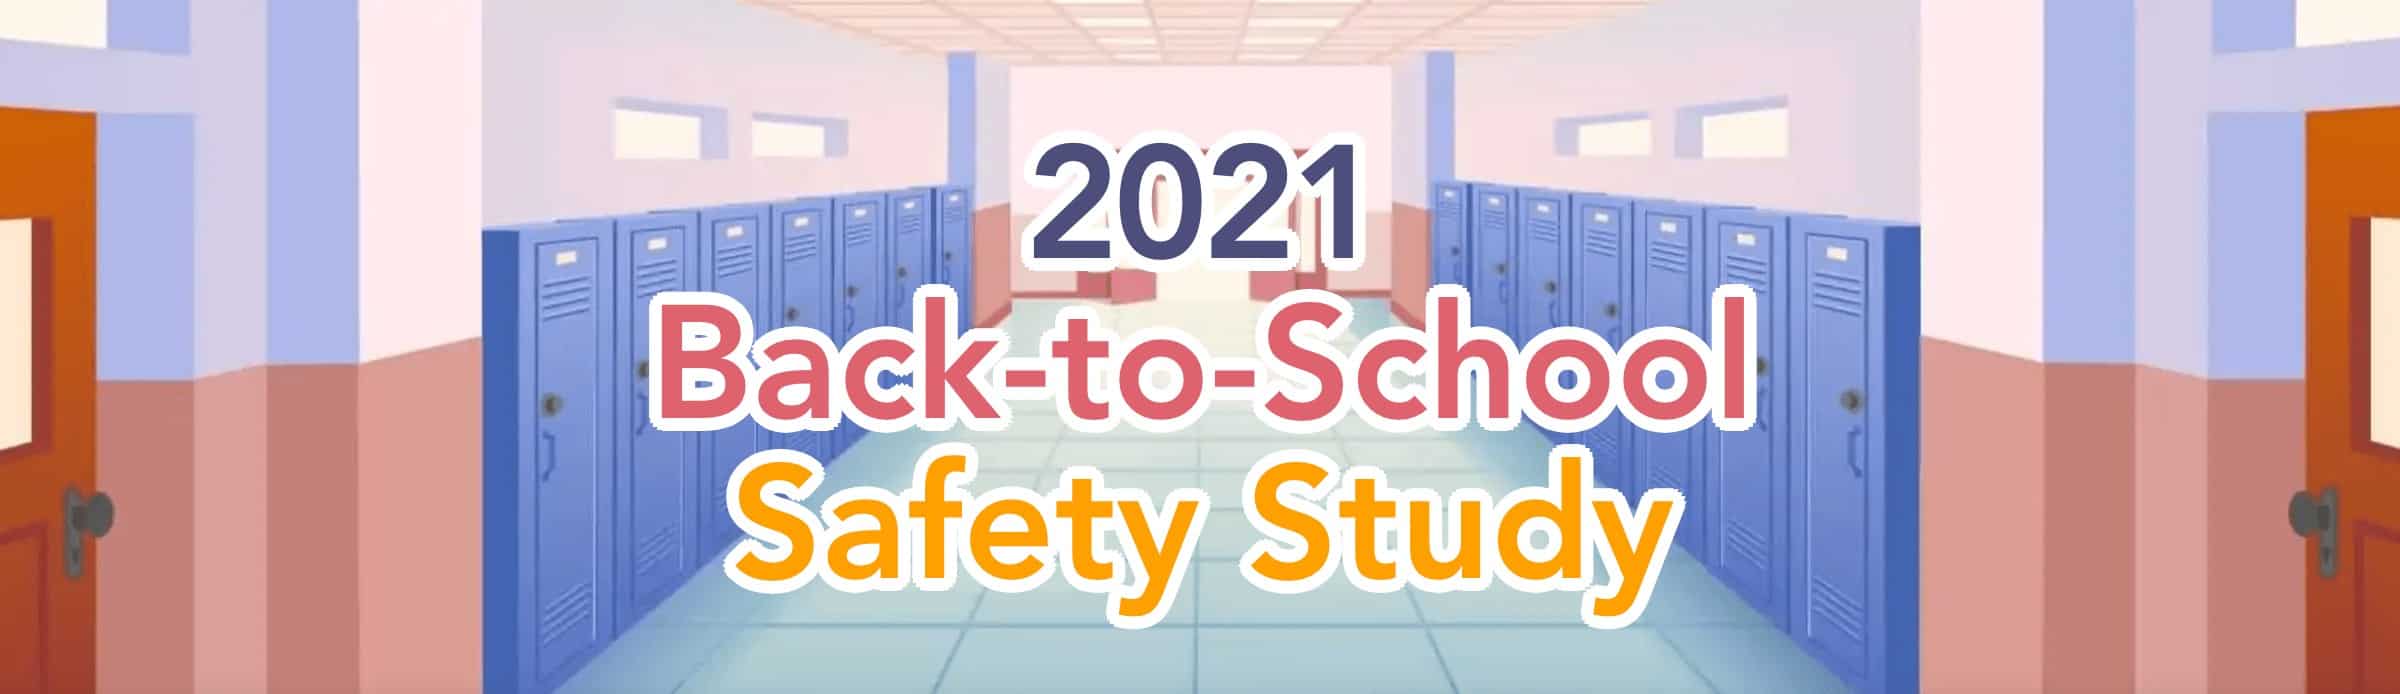 2021 Back-to-School Safety Study Featured Image